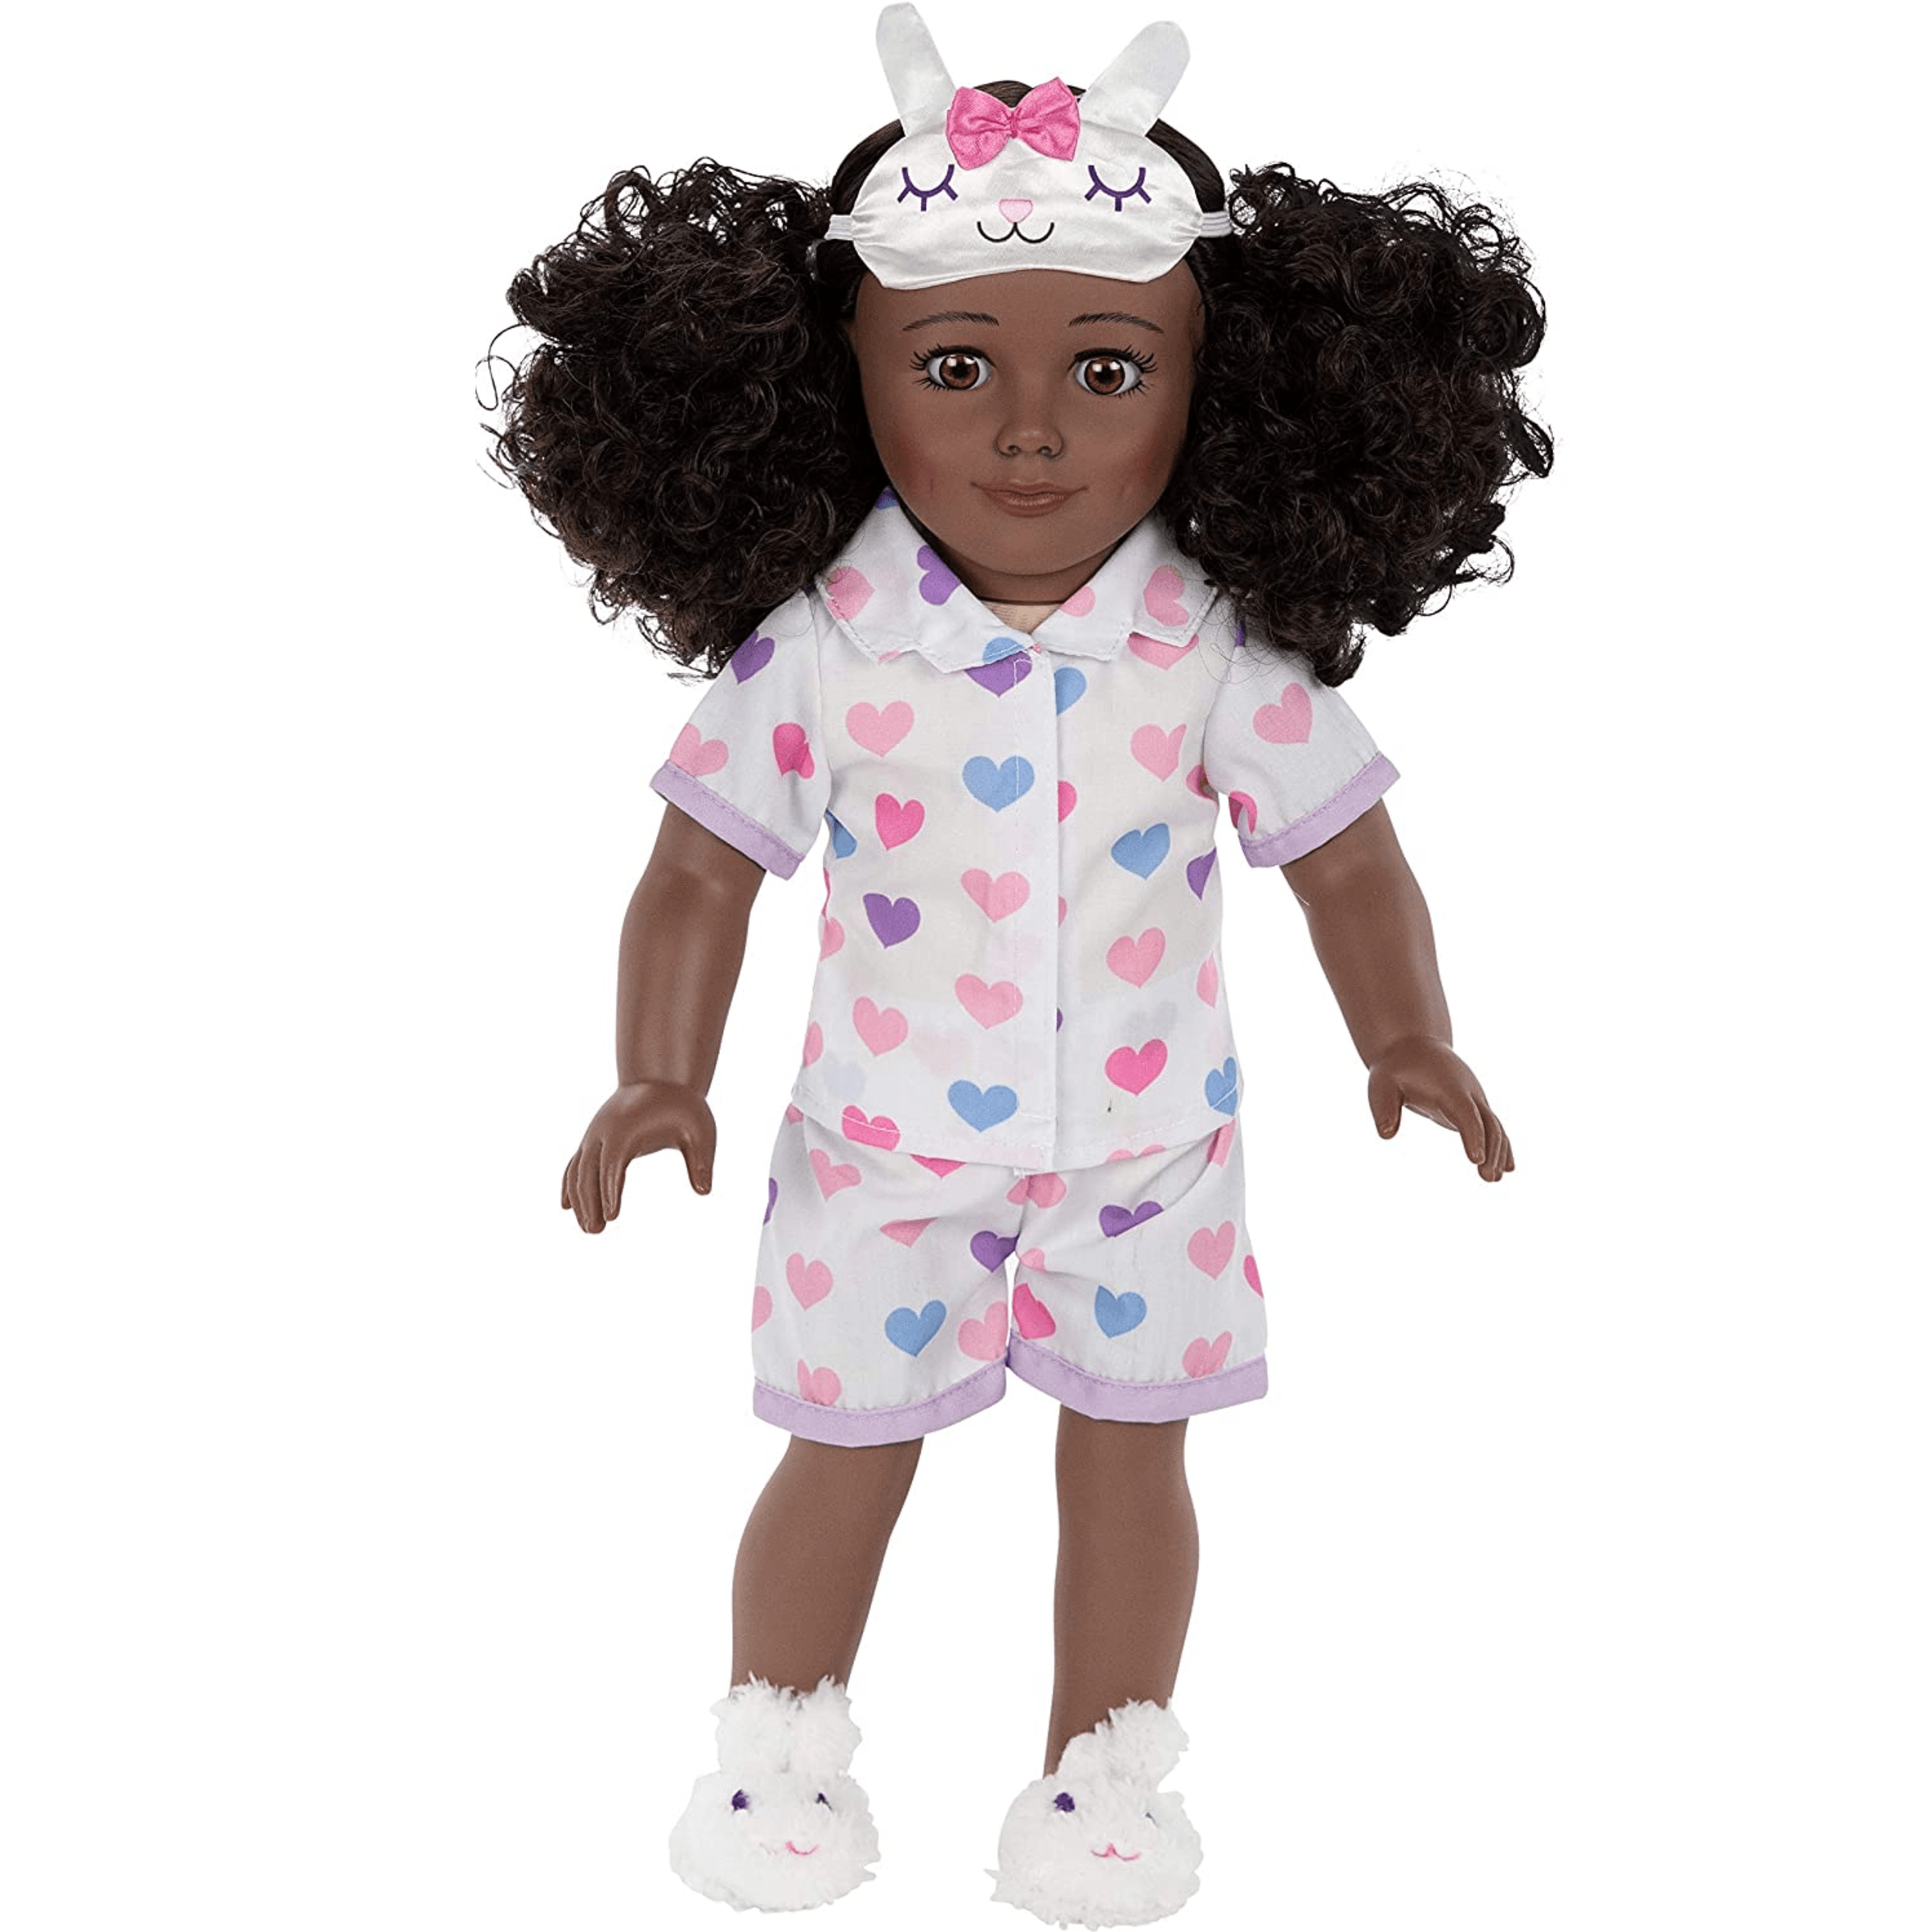 Playtime by Eimmie 18 Inch Vinyl Doll Kaylie Set with Backpack Carry Case - OrangeOnions Wholesale